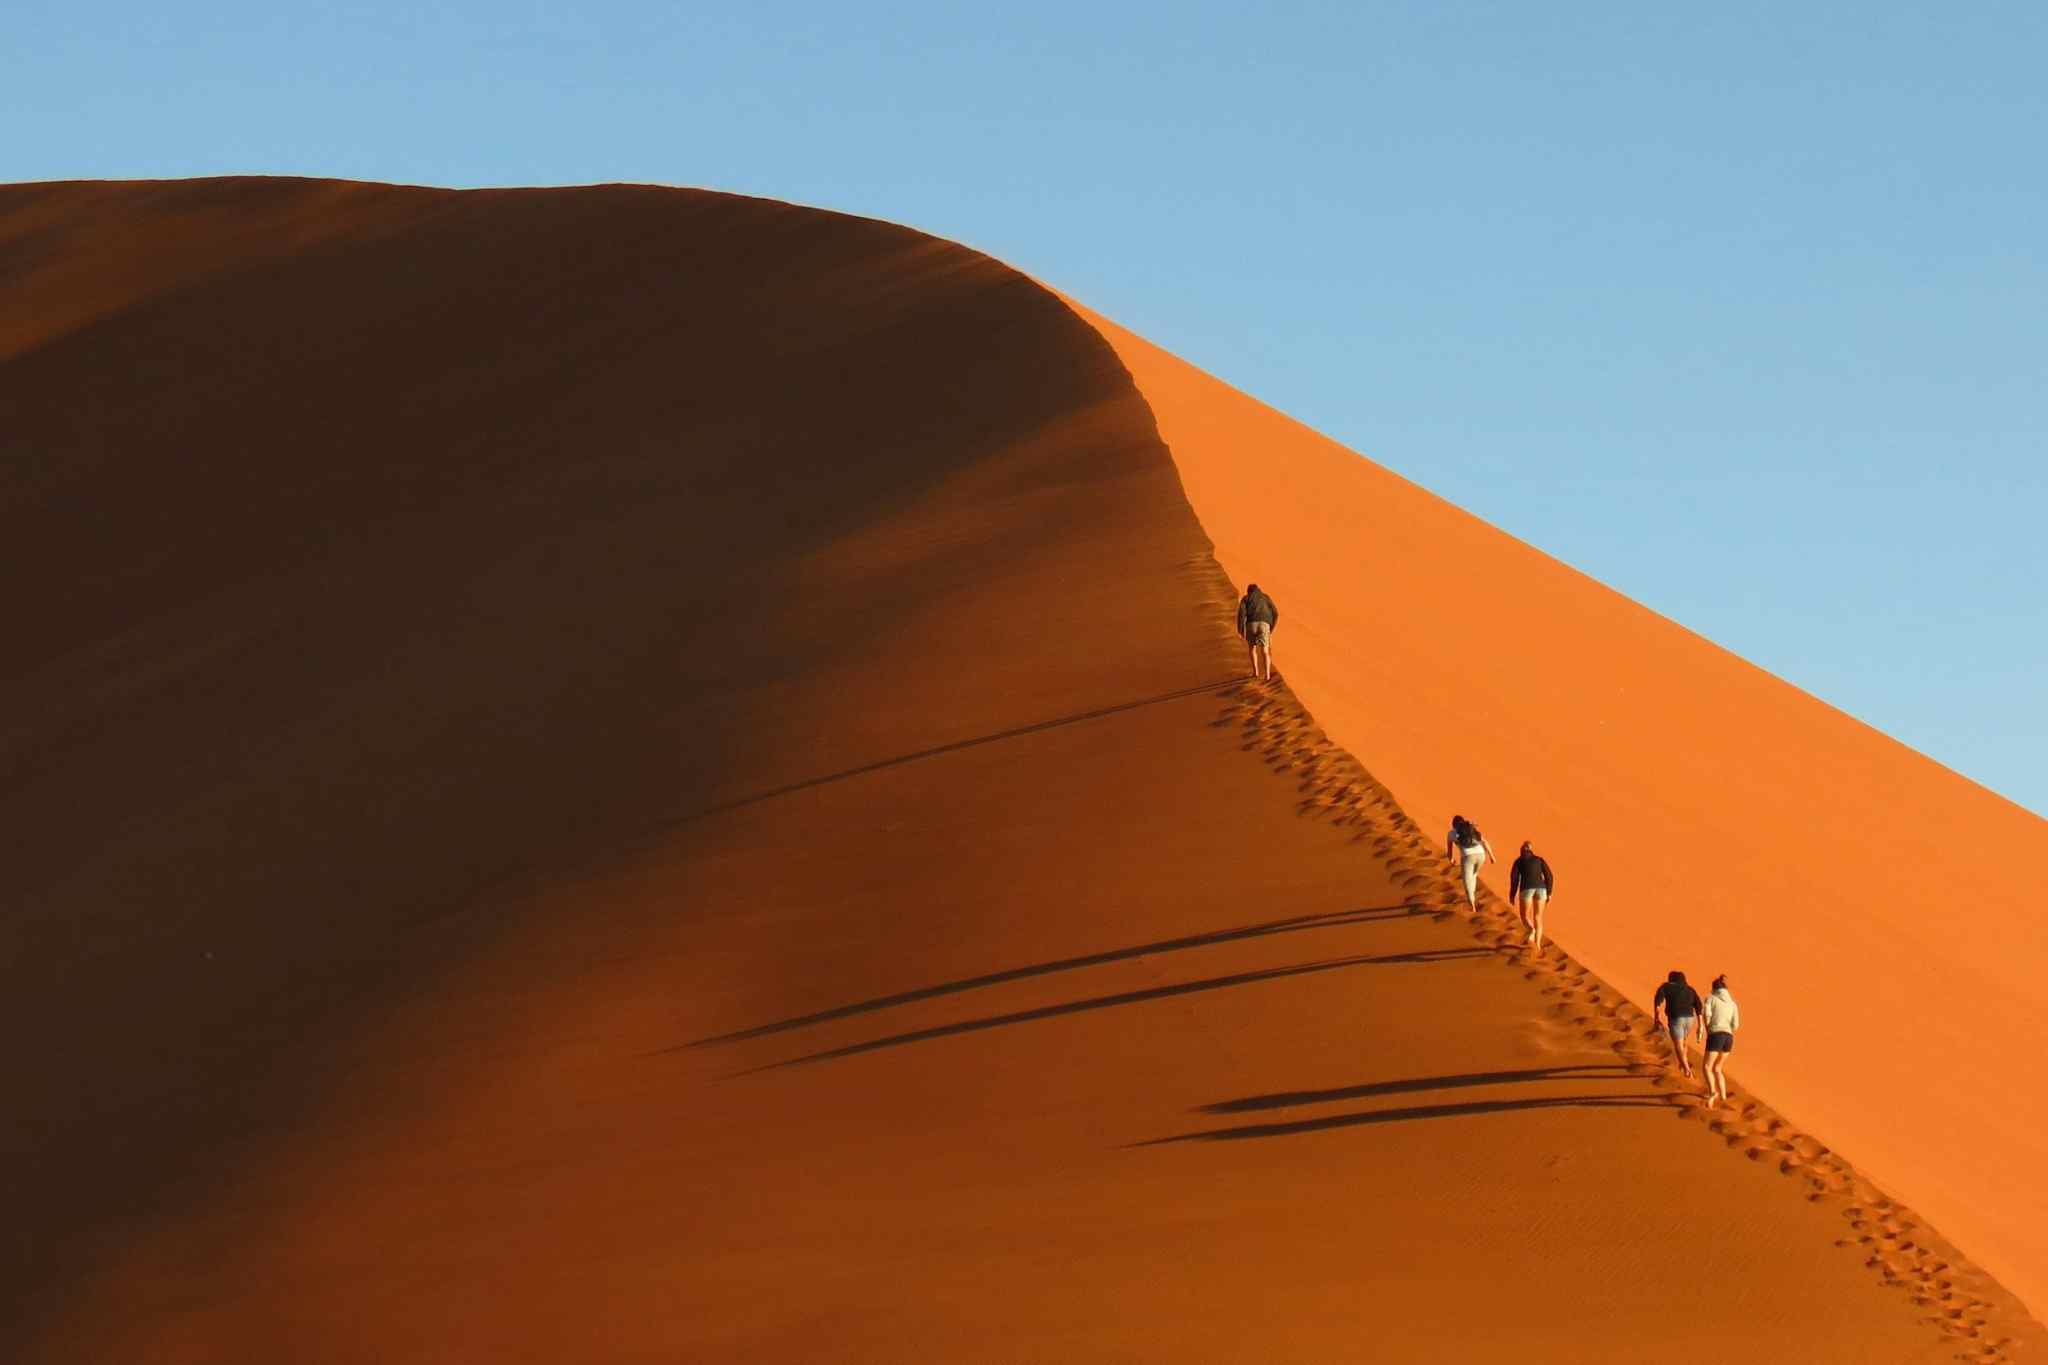 https://www.canva.com/photos/MAD-02pvTq4-landscape-sand-dunes-45-namibia-sossusvlei-africa-hiking-outside-uphill-shadows-people/